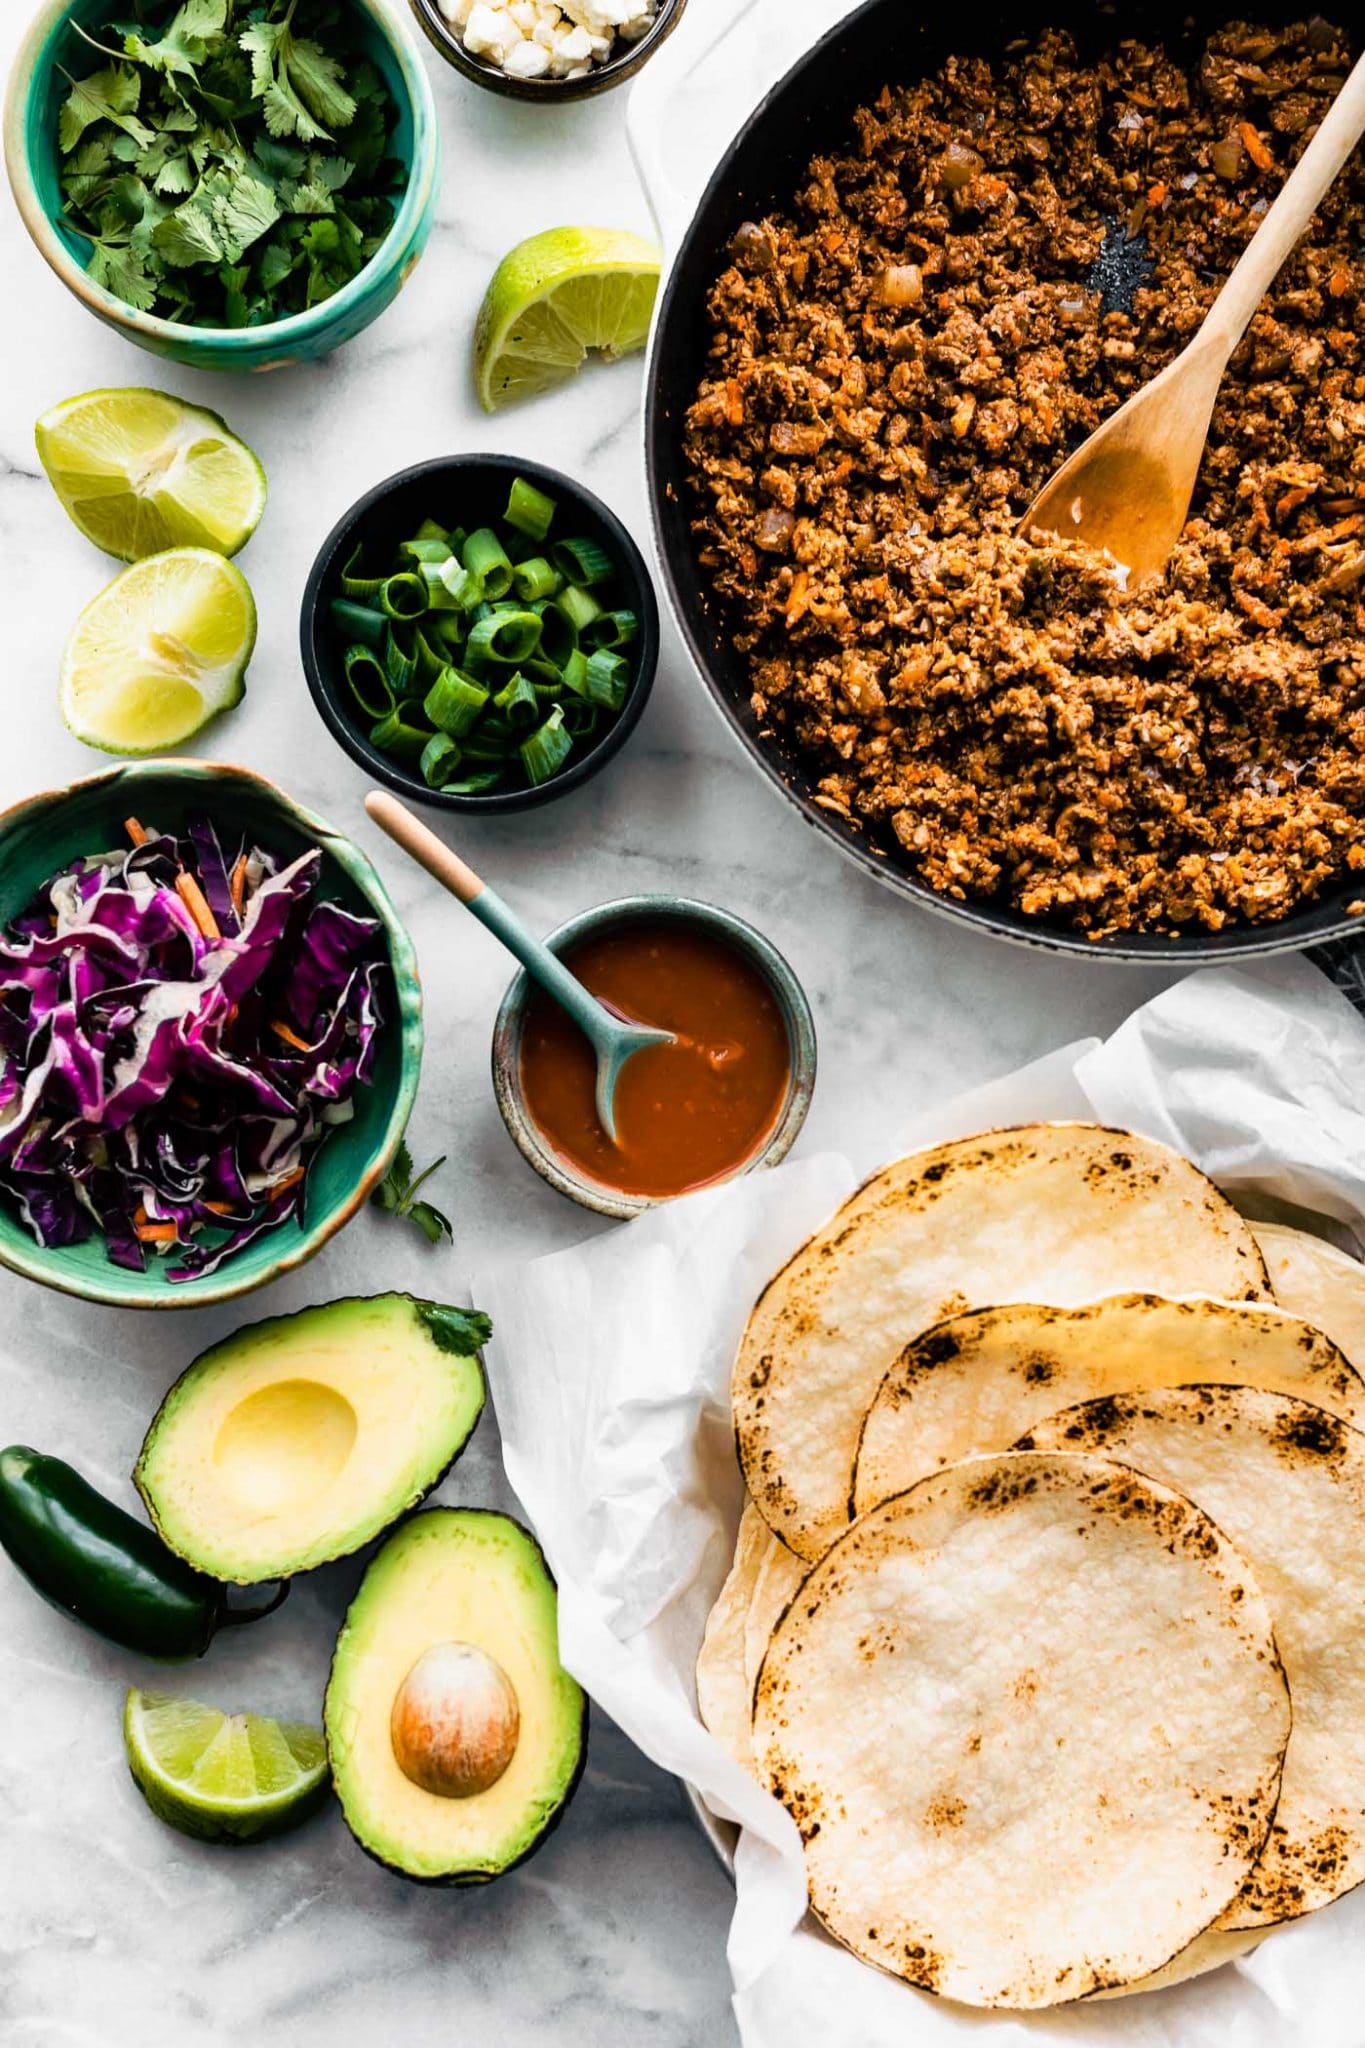 Vegan taco meat with tortillas and fixings.